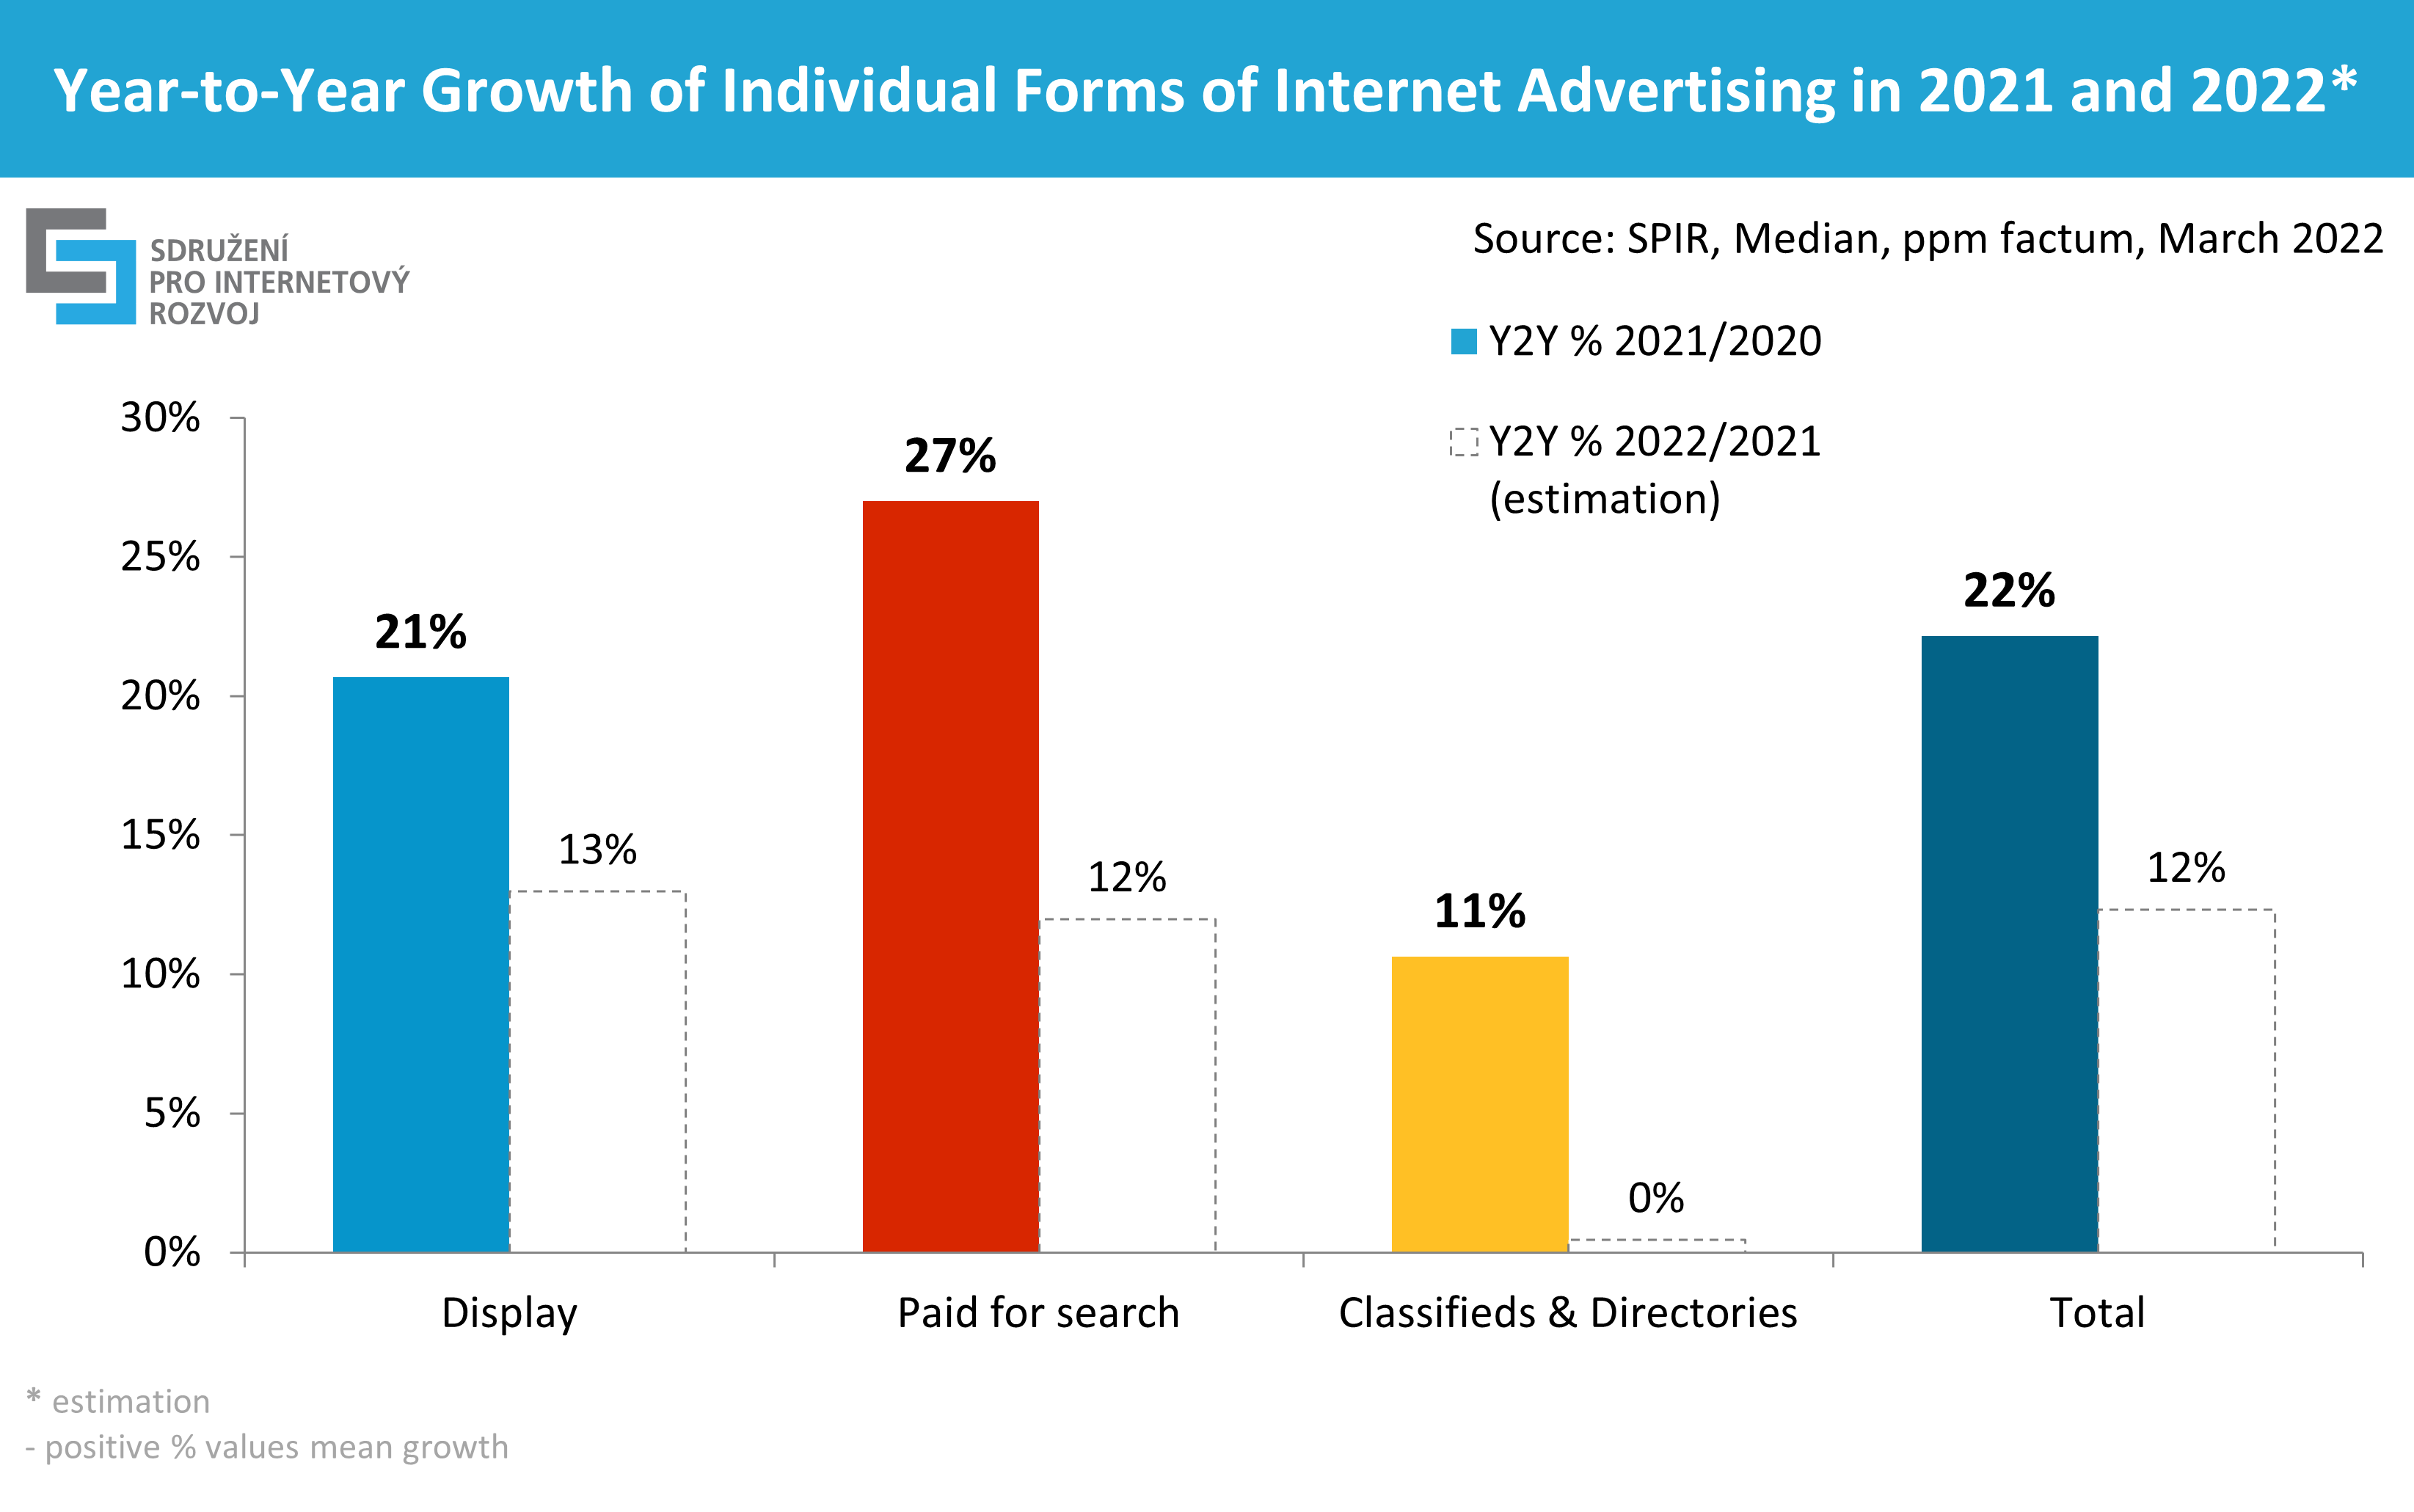 Year-on-year changes in individual forms of Internet advertising in 2021 and an estimate for 2022